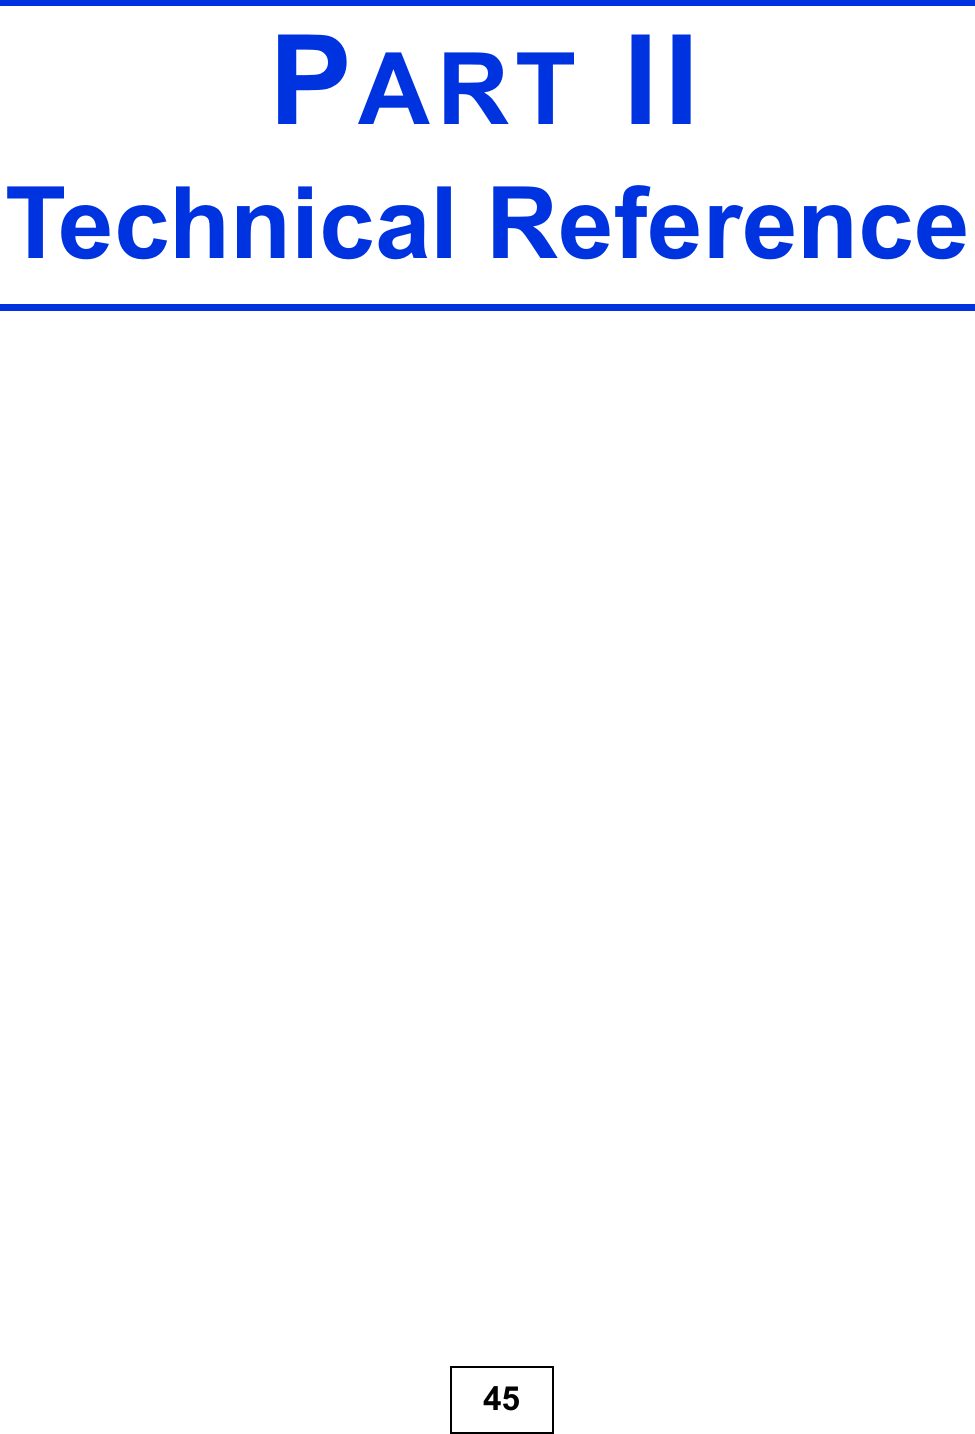 45PART IITechnical Reference